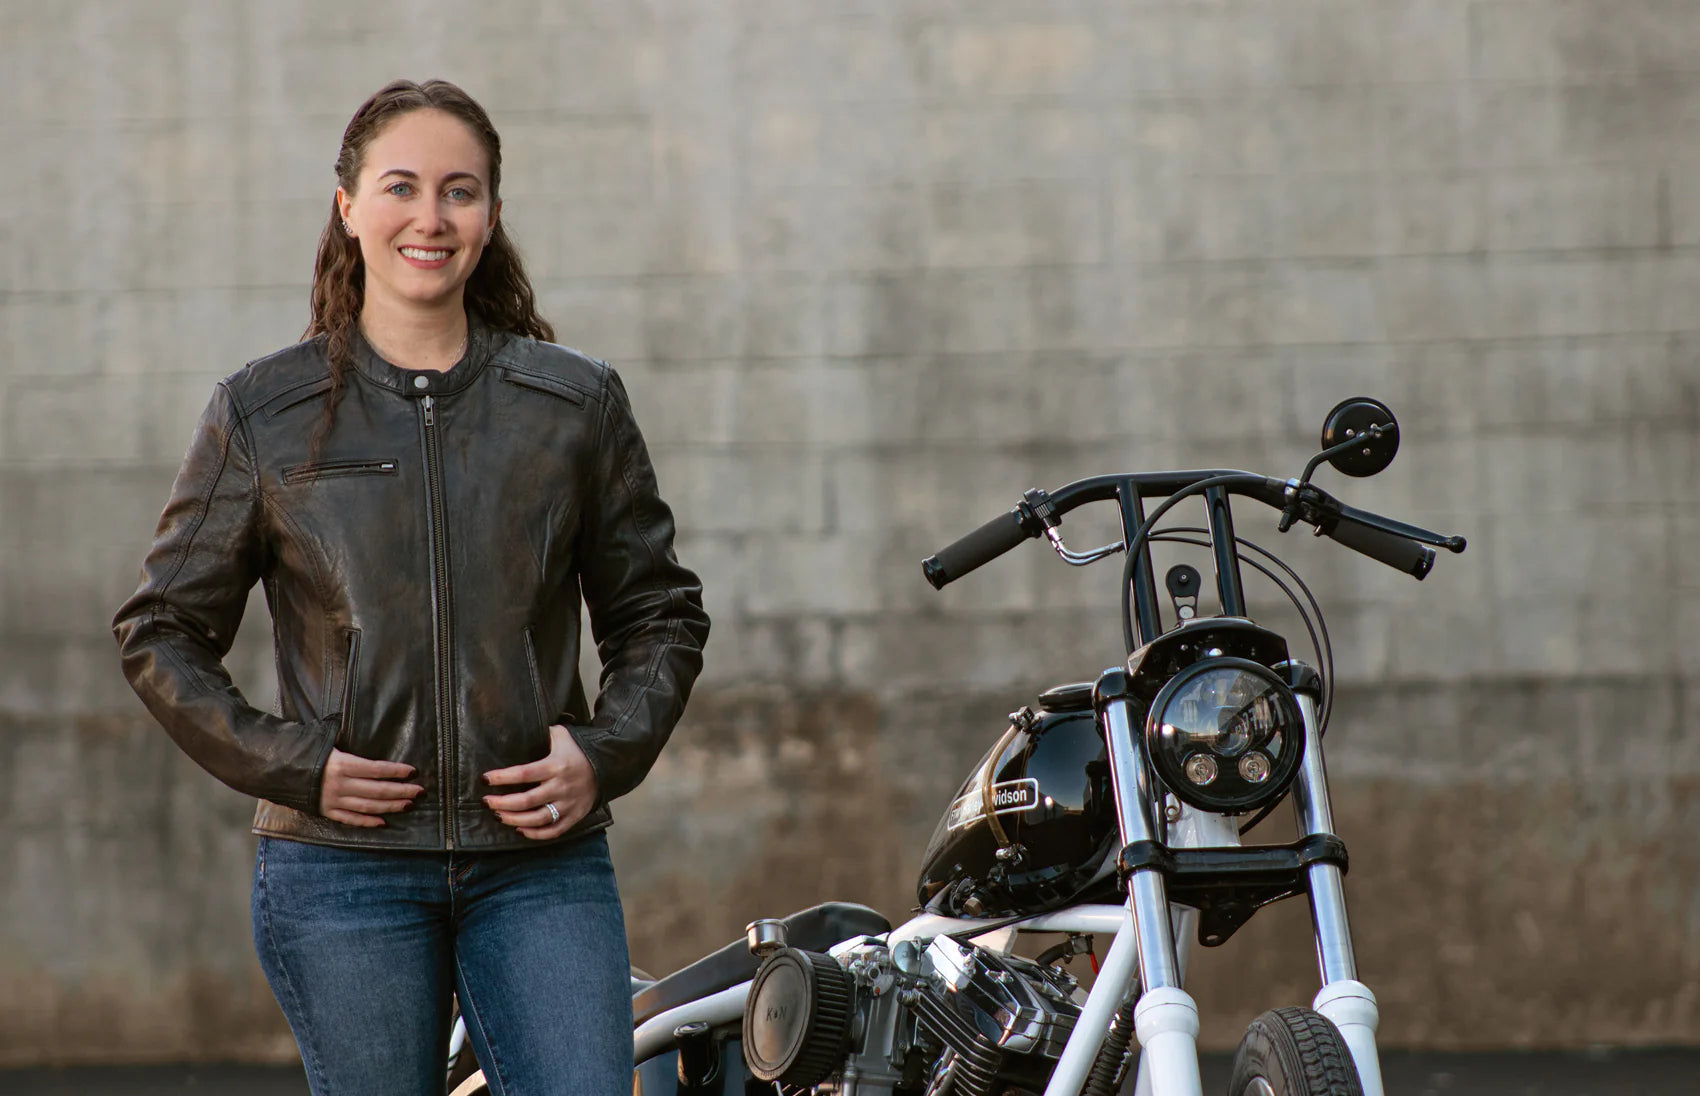 Stylish Women's Trickster Motorcycle Jacket: Front View. Embrace the Vents and Conceal Carry Pockets!